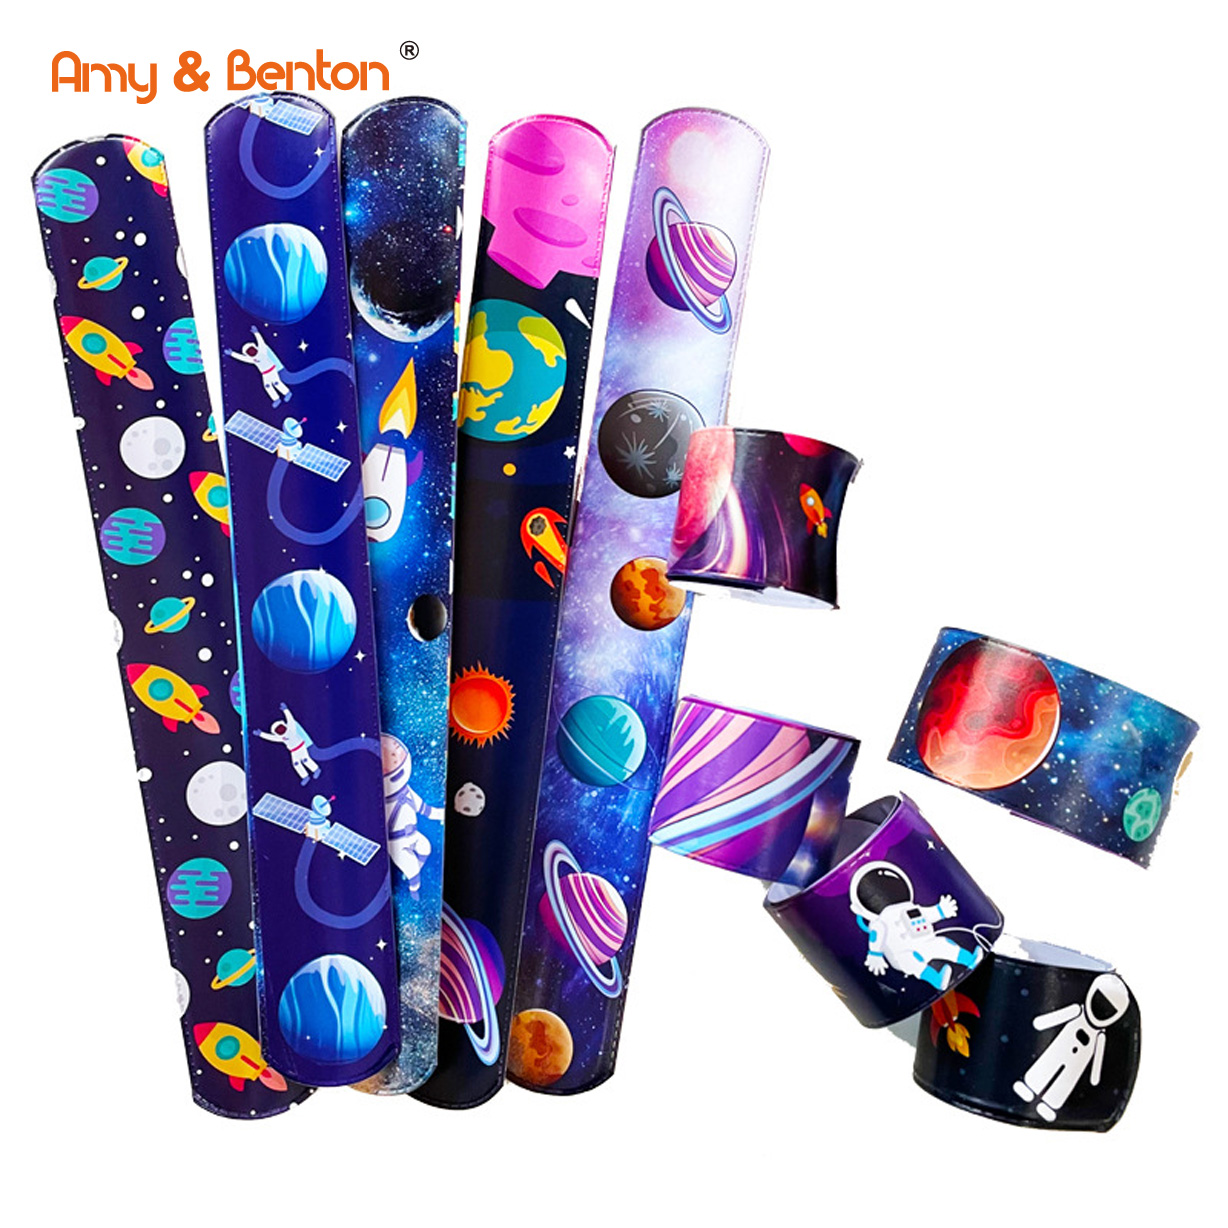 100 stk Outer Space Party Favors-6